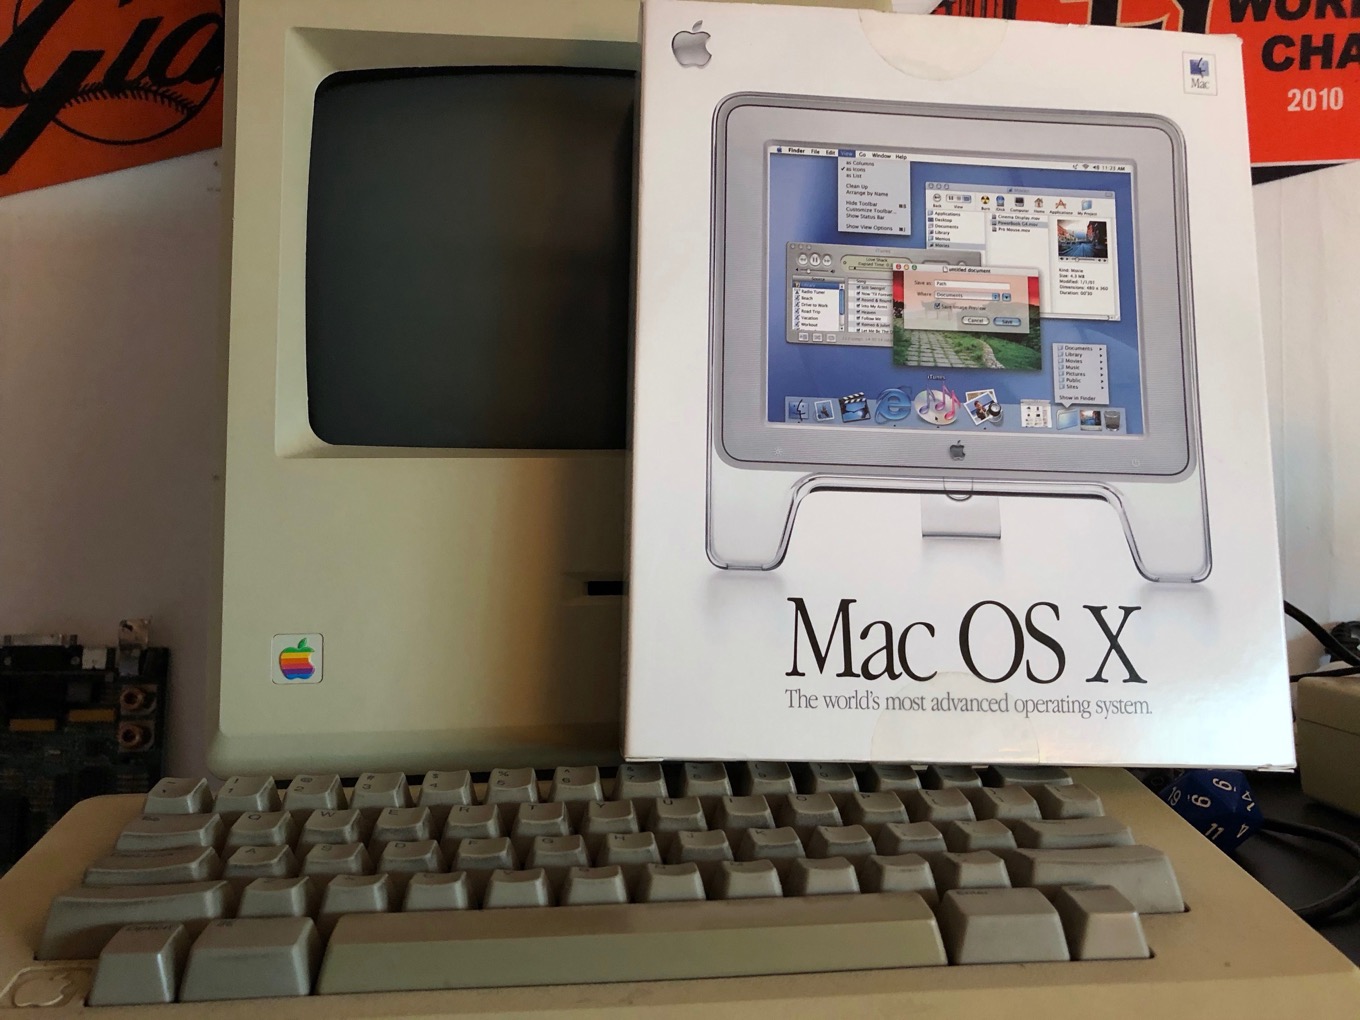 classic games for mac os x